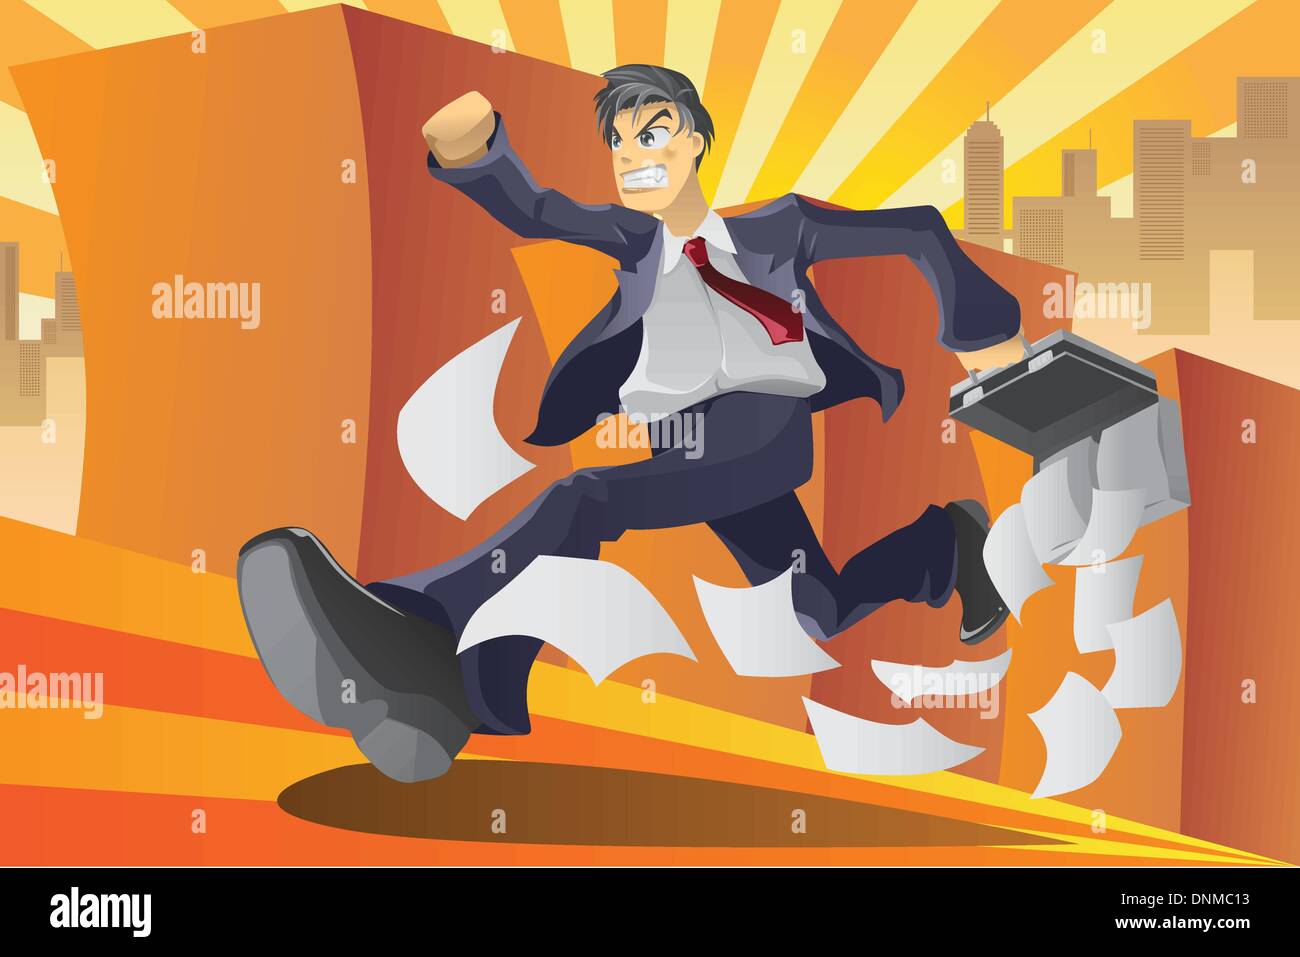 A vector illustration of a businessman running in a hurry Stock Vector